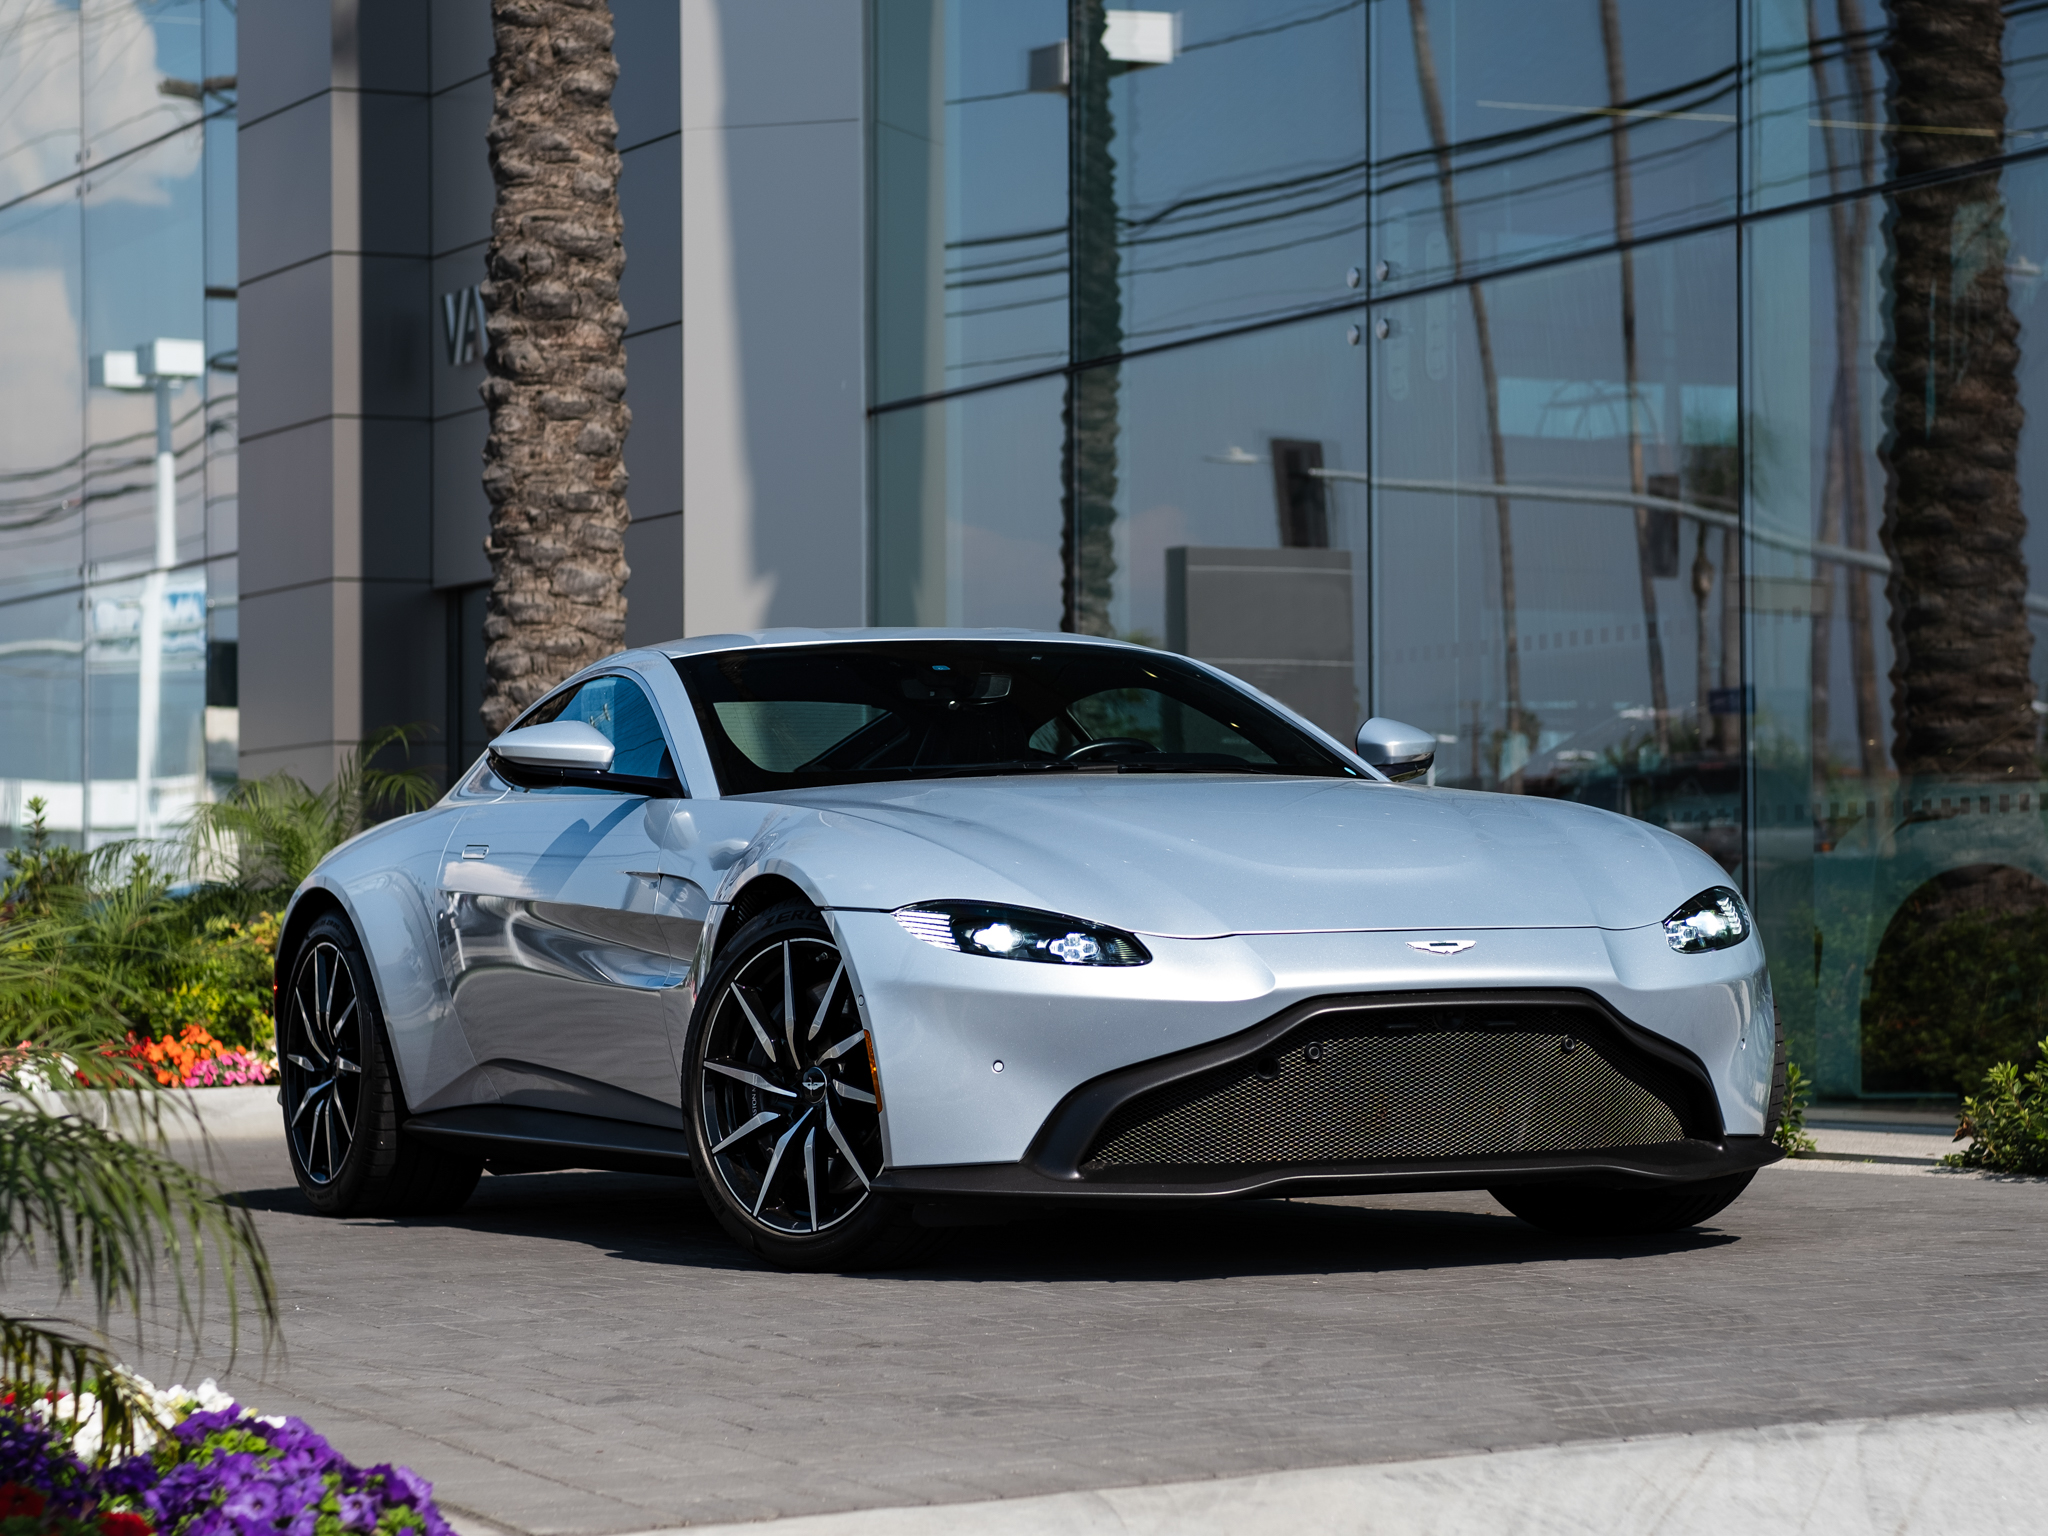 The 2020 Aston Martin Vantage Coupe is the Entry Level to the